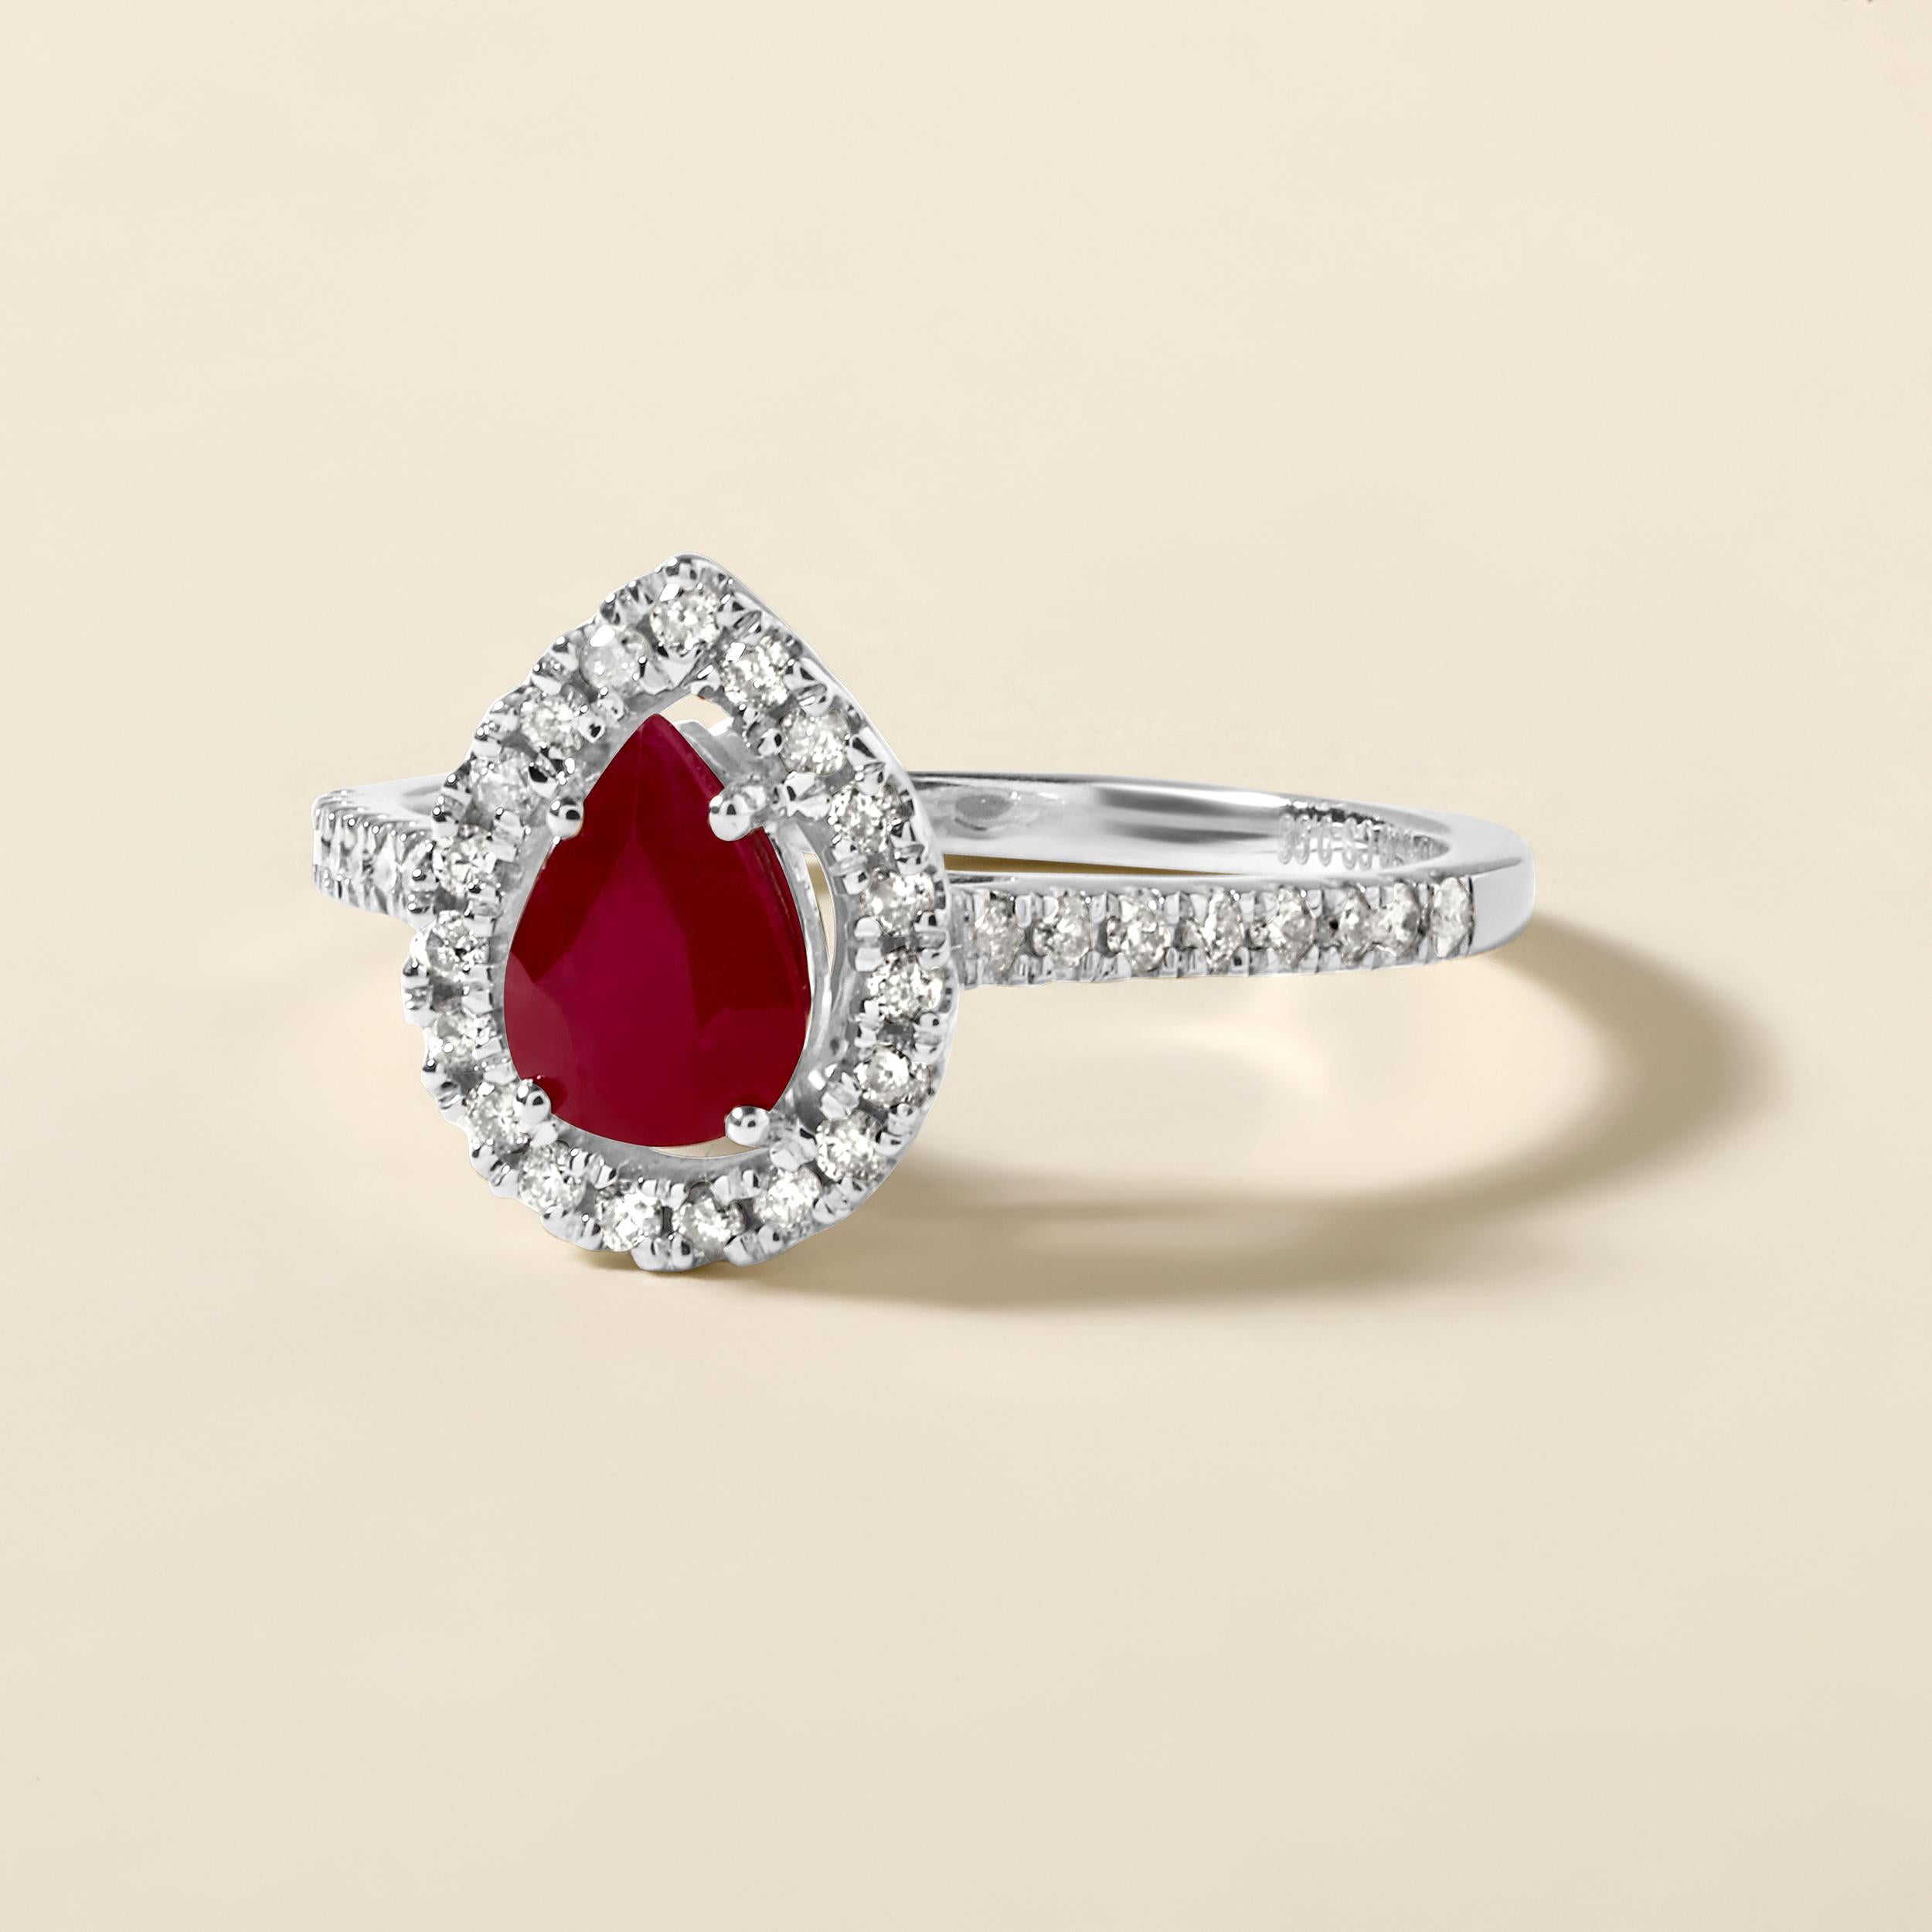 Ring Size: US 7

Crafted in 2.47 grams of 14K White Gold, the ring contains 35 stones of Round Natural Diamonds with a total of 0.28 carat in G-H color and I1-I2 clarity combined with 1 stone of Pear Shaped Natural Ruby Gemstone with a total of 0.96